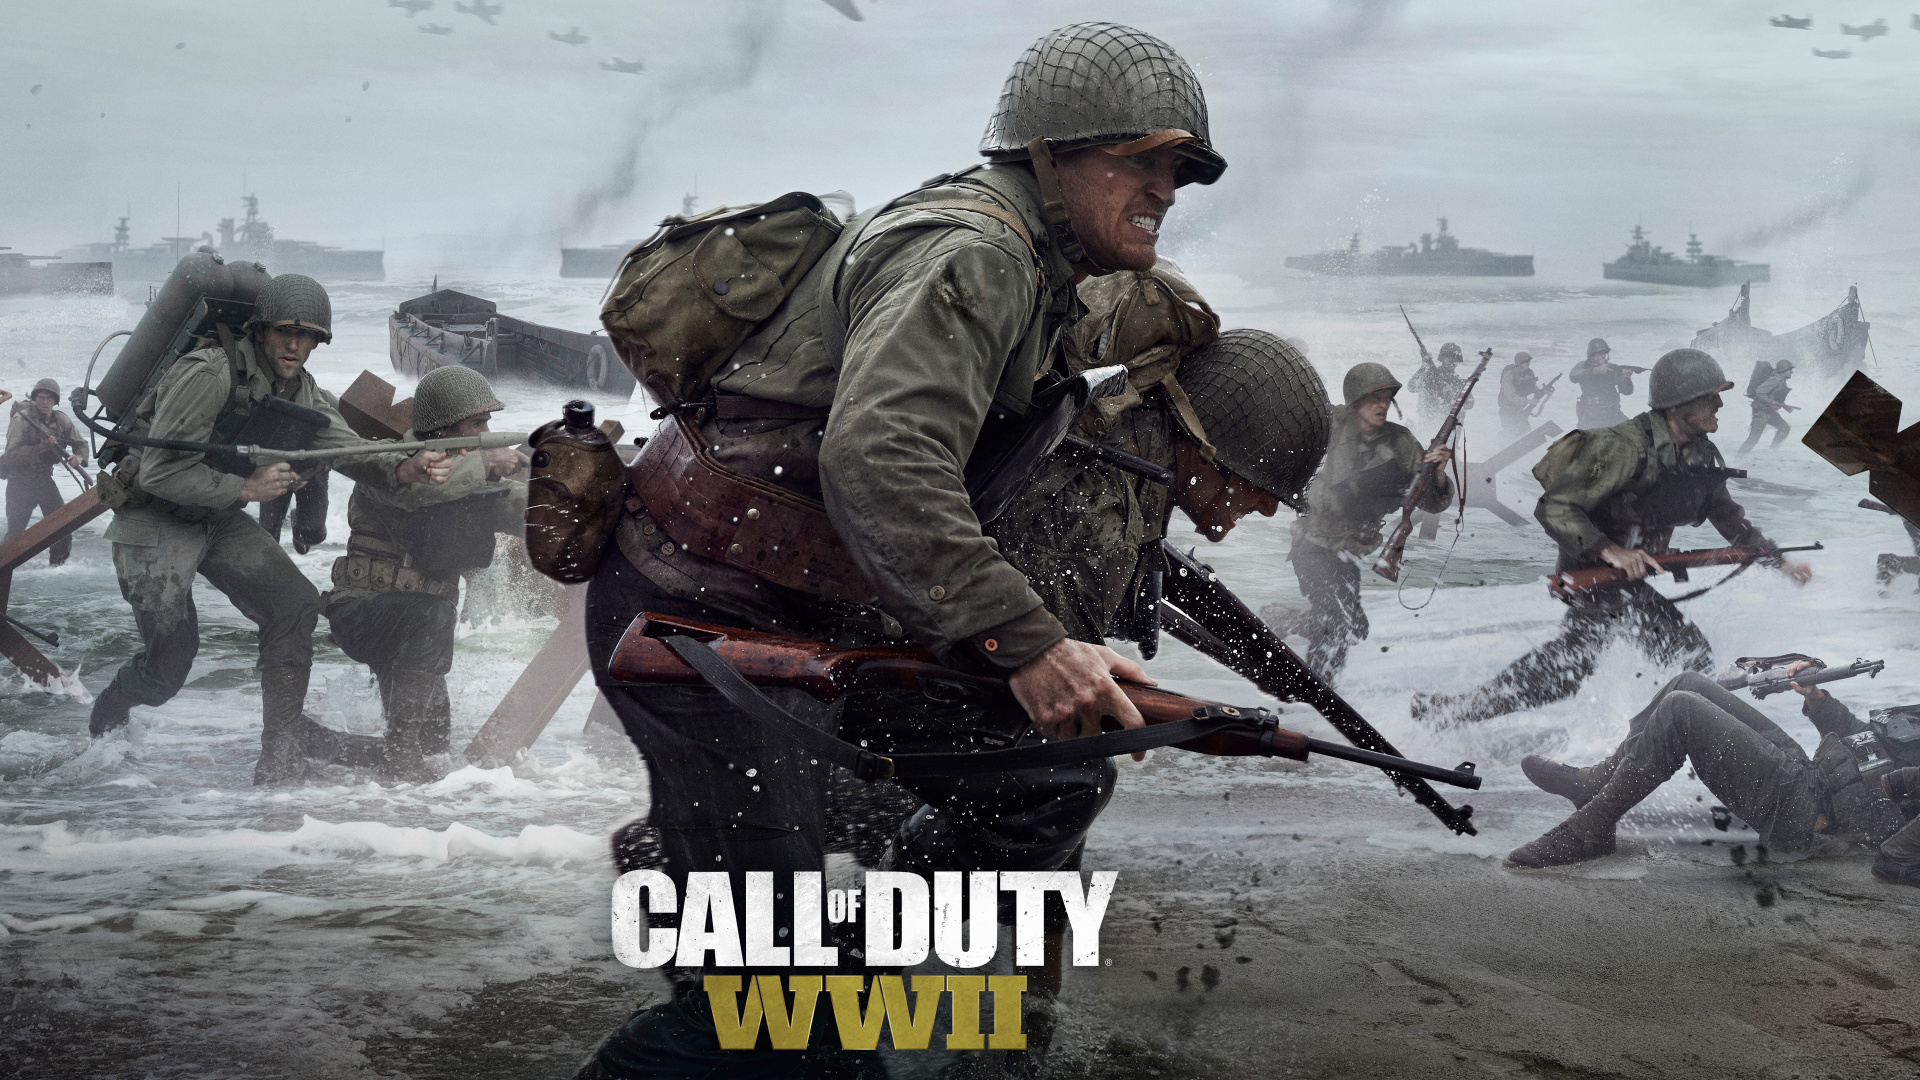 Call of Duty Ww2, Call of Duty WWII, Call of Duty, Call of Duty World at War, Activision. Wallpaper in 1920x1080 Resolution